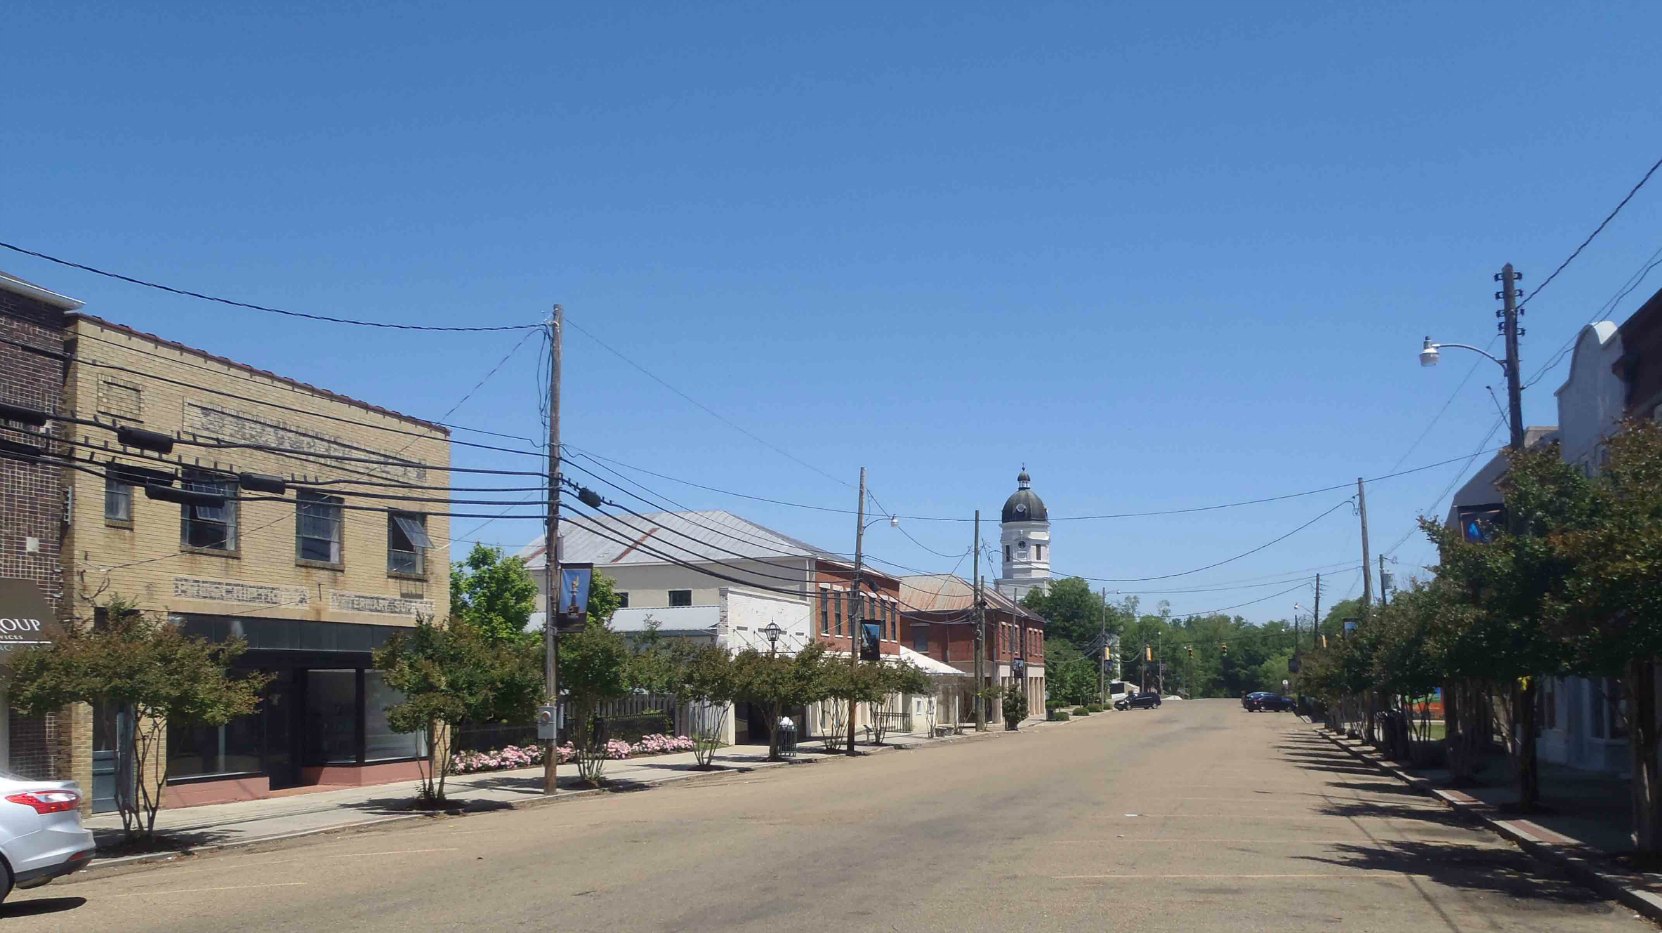 Market Street, the main downtown street in Port Gibson, Claiborne County, Mississippi. The tower of the Claiborne County Courthouse is visible in the background.